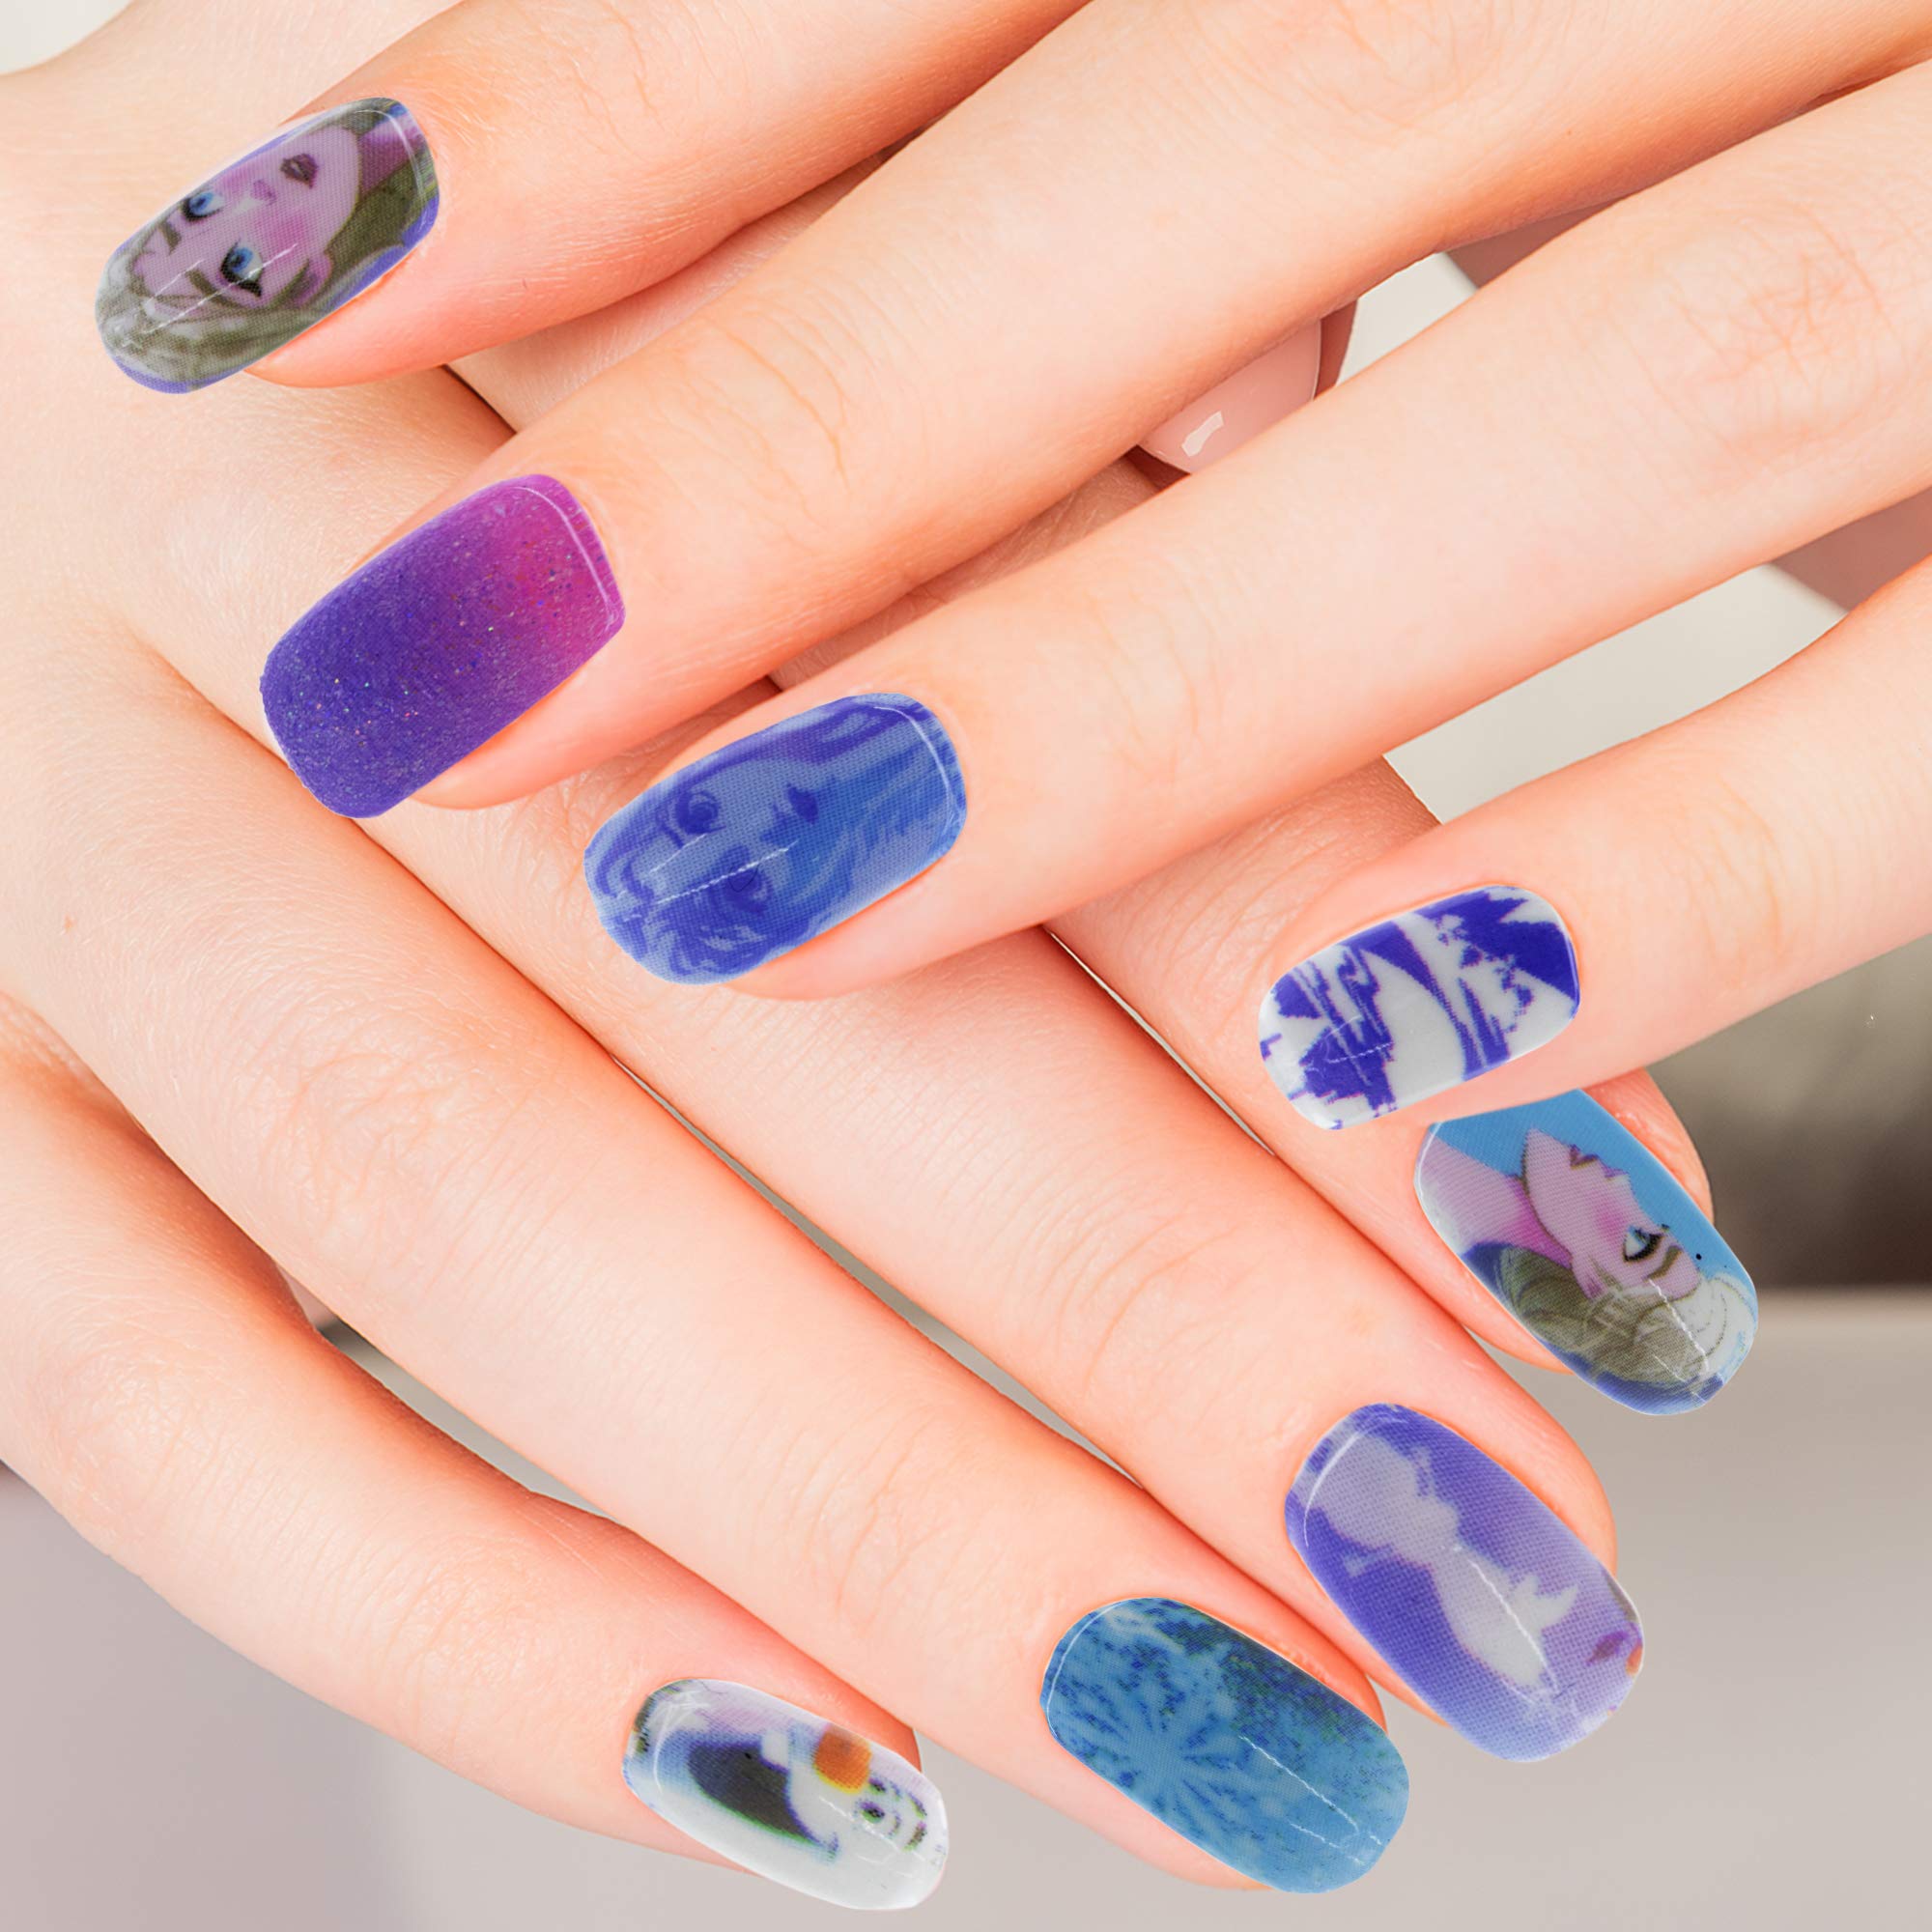 This Is Colour-Changing Nail Art Inspired By Disney's Frozen 2 That We Need  | Disney Video | Singapore